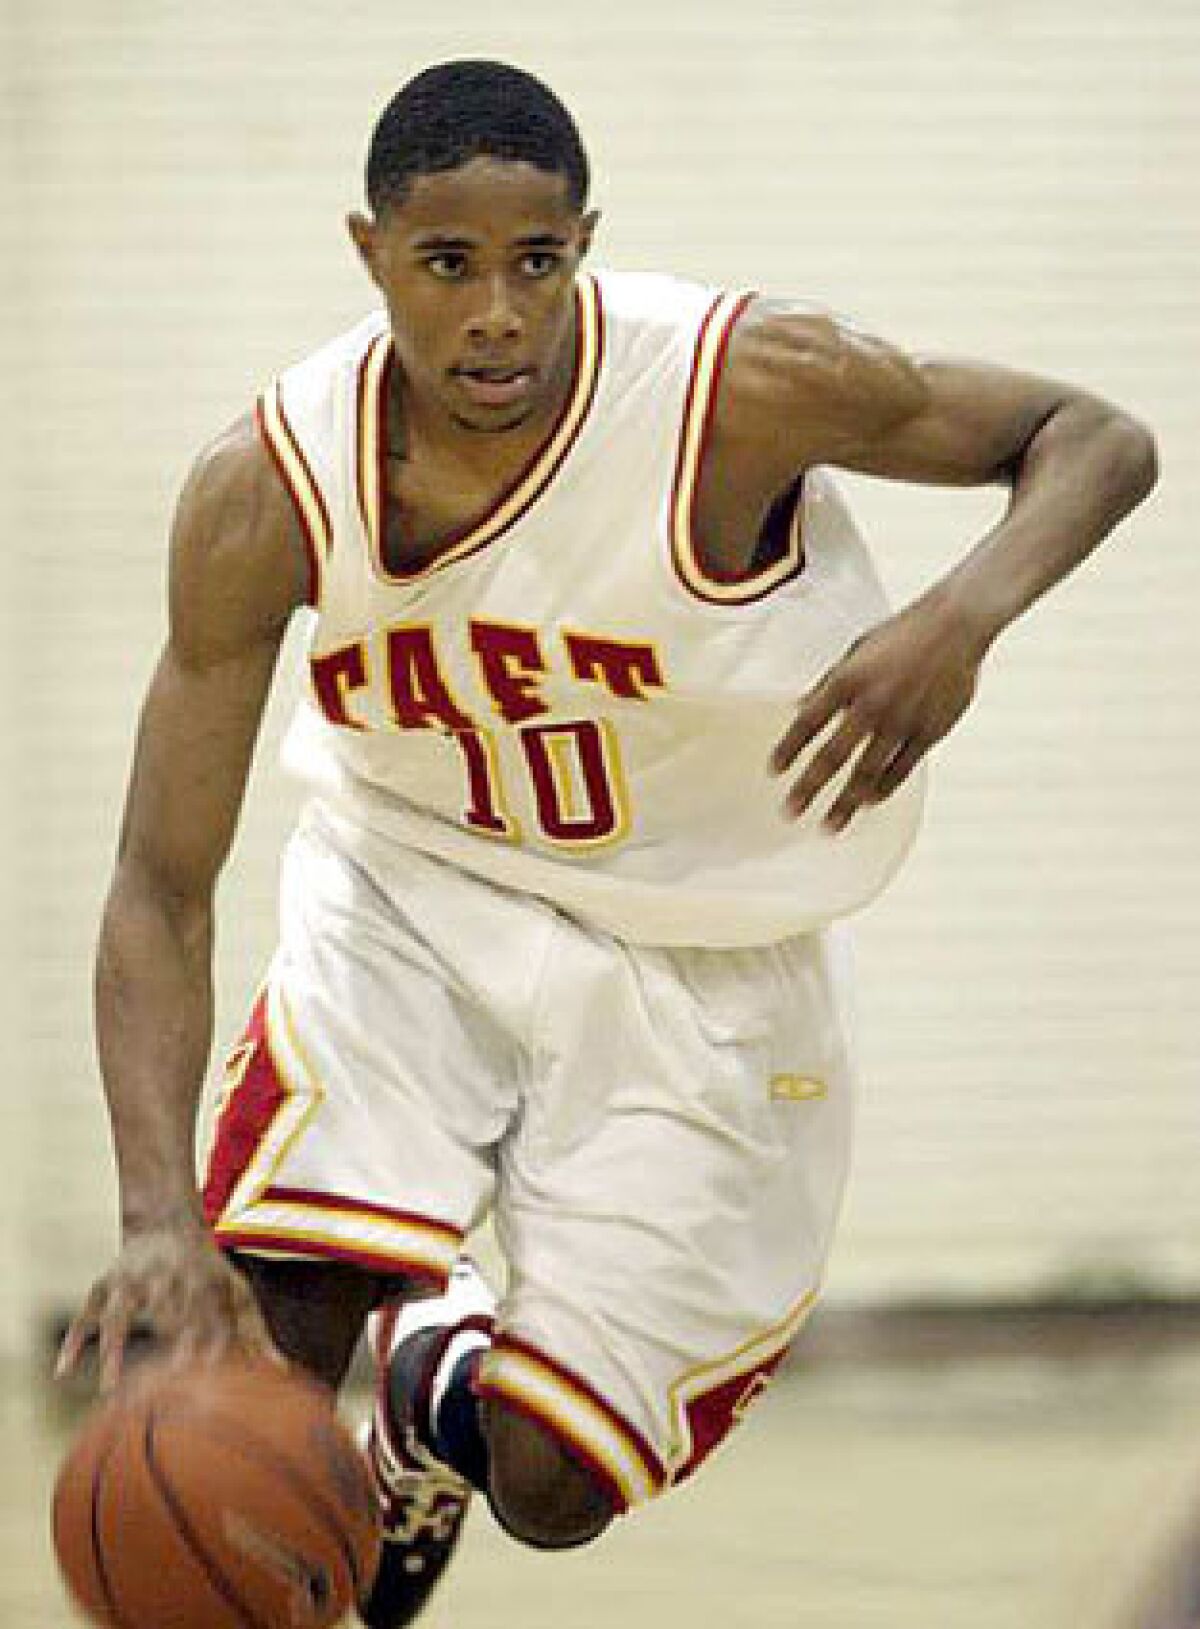 Woodland Hills Taft High School's Larry Drew Jr., who will play his college ball at North Carolina, lives in Encino. Like all members of the Taft starting lineup, he took advantage of the school's plethora of open-enrollment slots to join a stronger basketball program than the one at the school in whose district they each live.